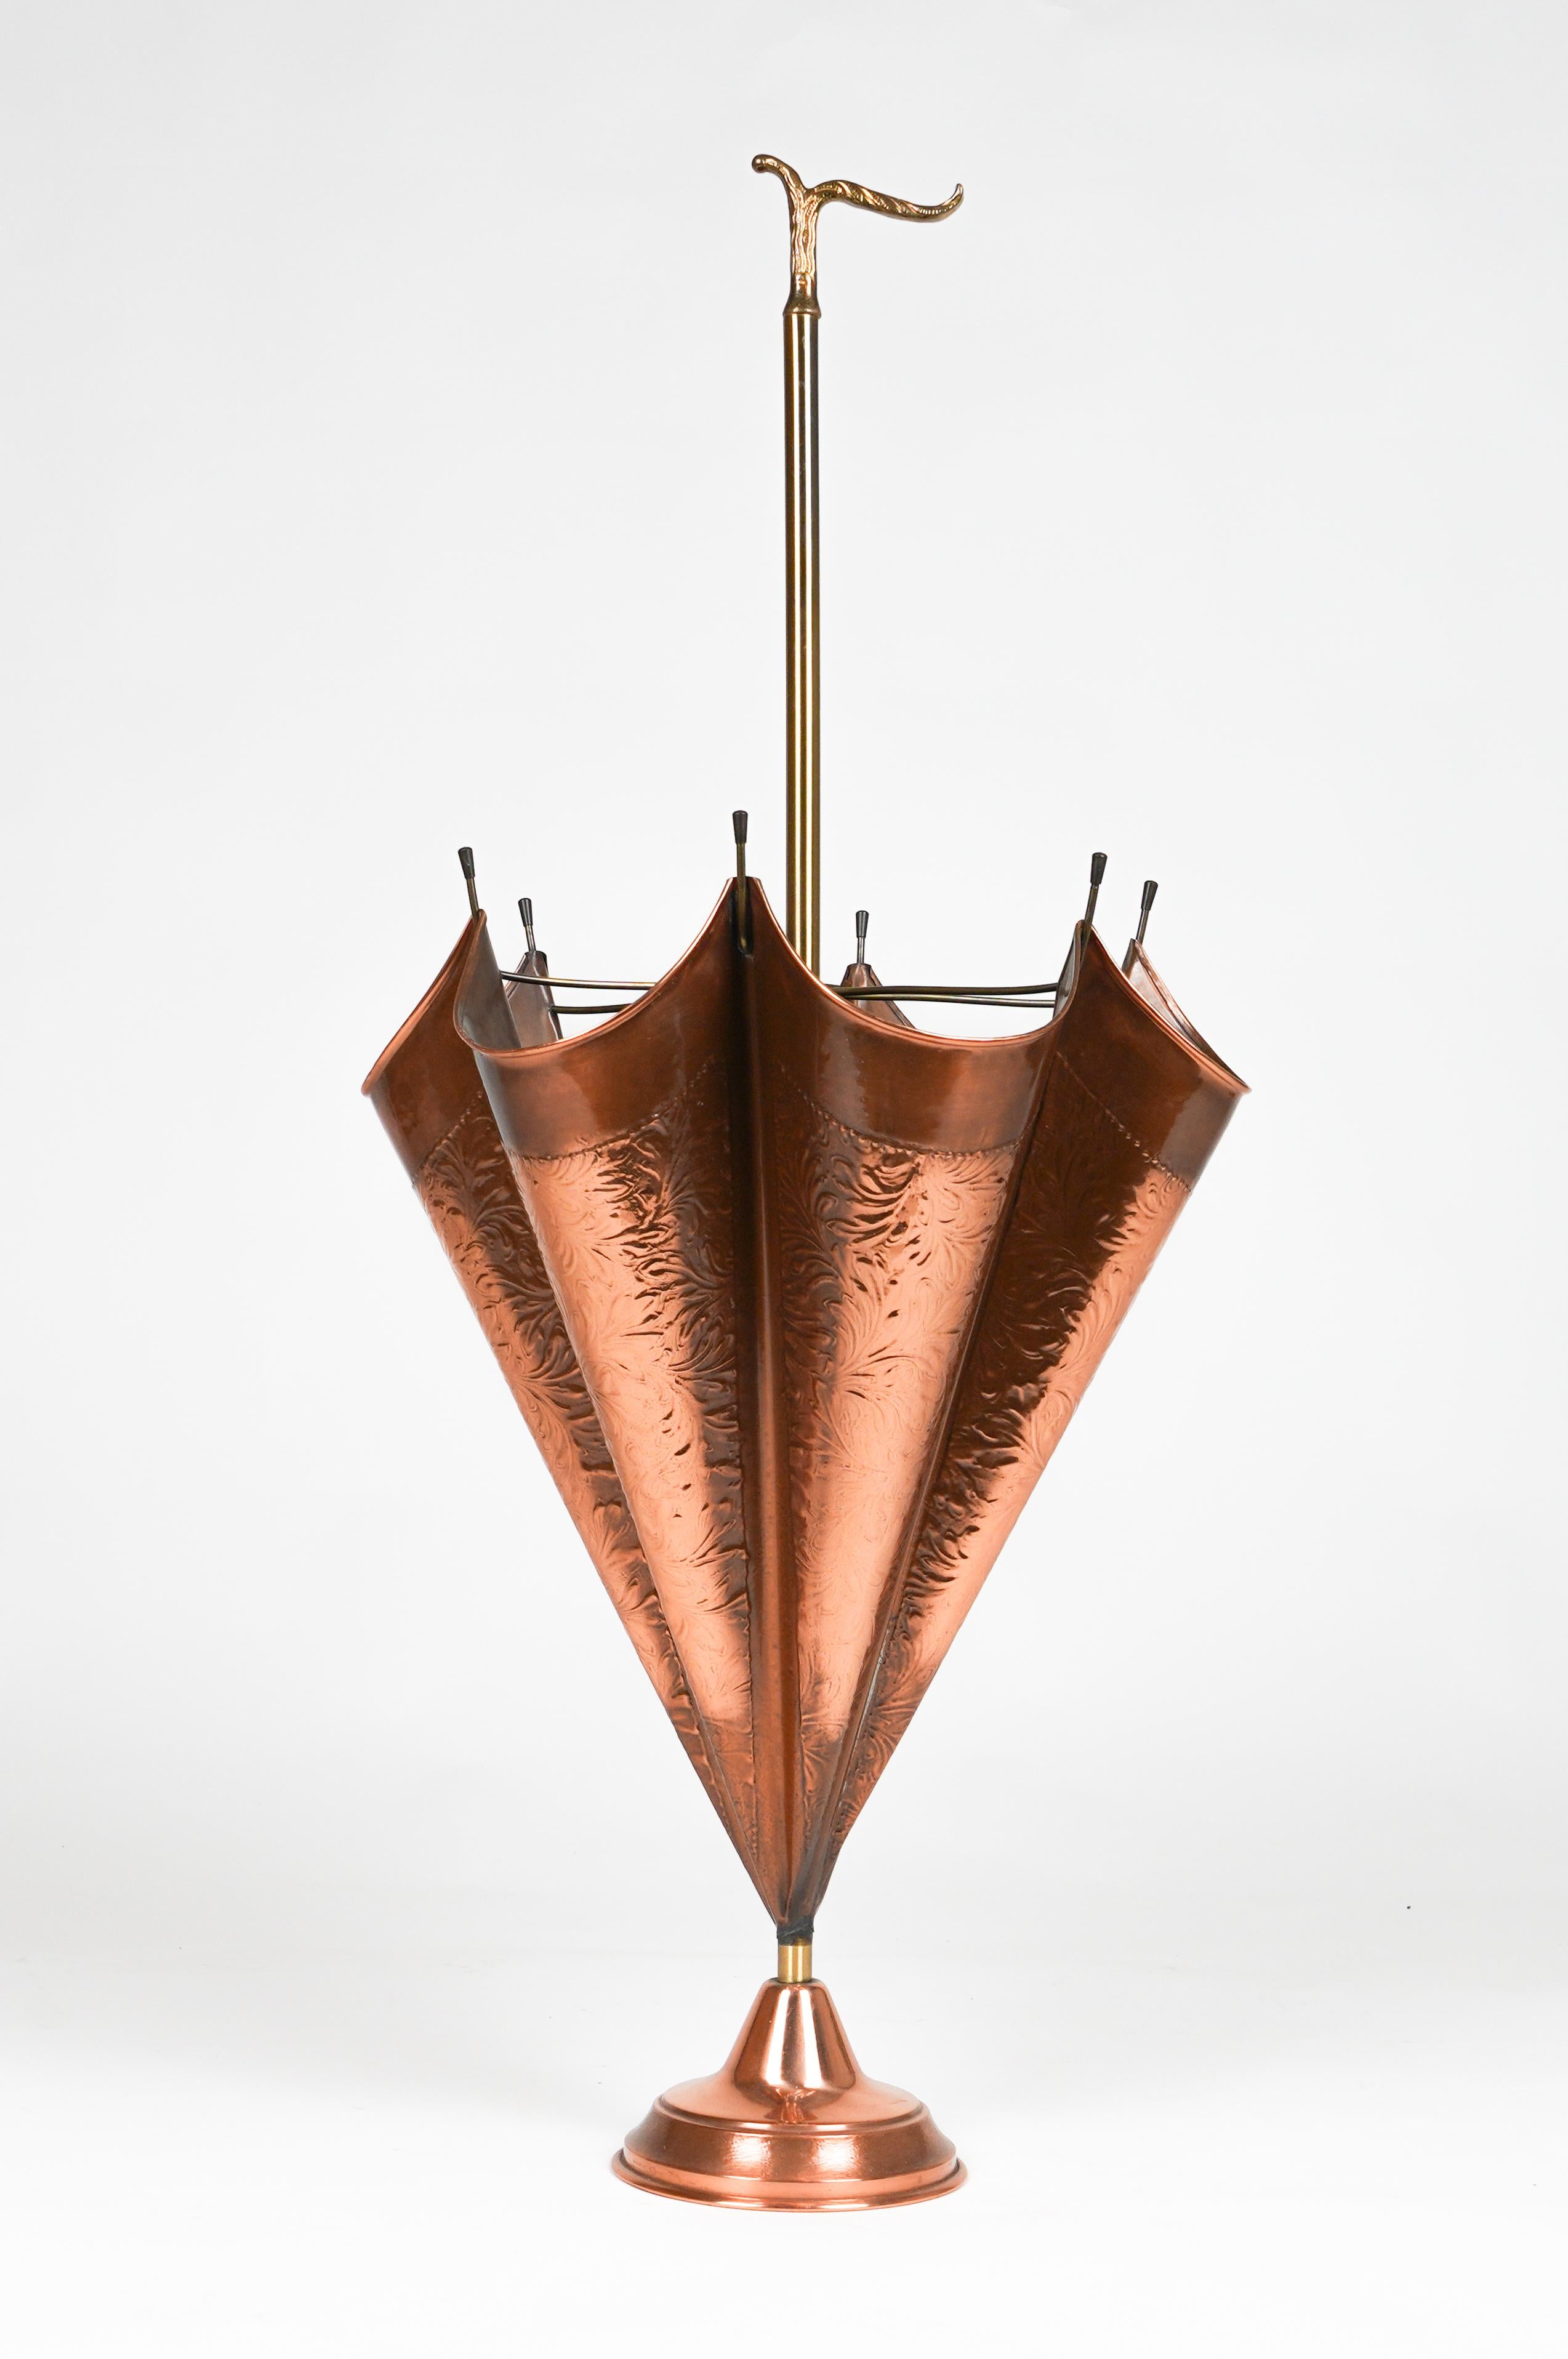 Mid-Century Modern Midcentury Umbrella Stand in Copper and Brass, Italy 1970s For Sale